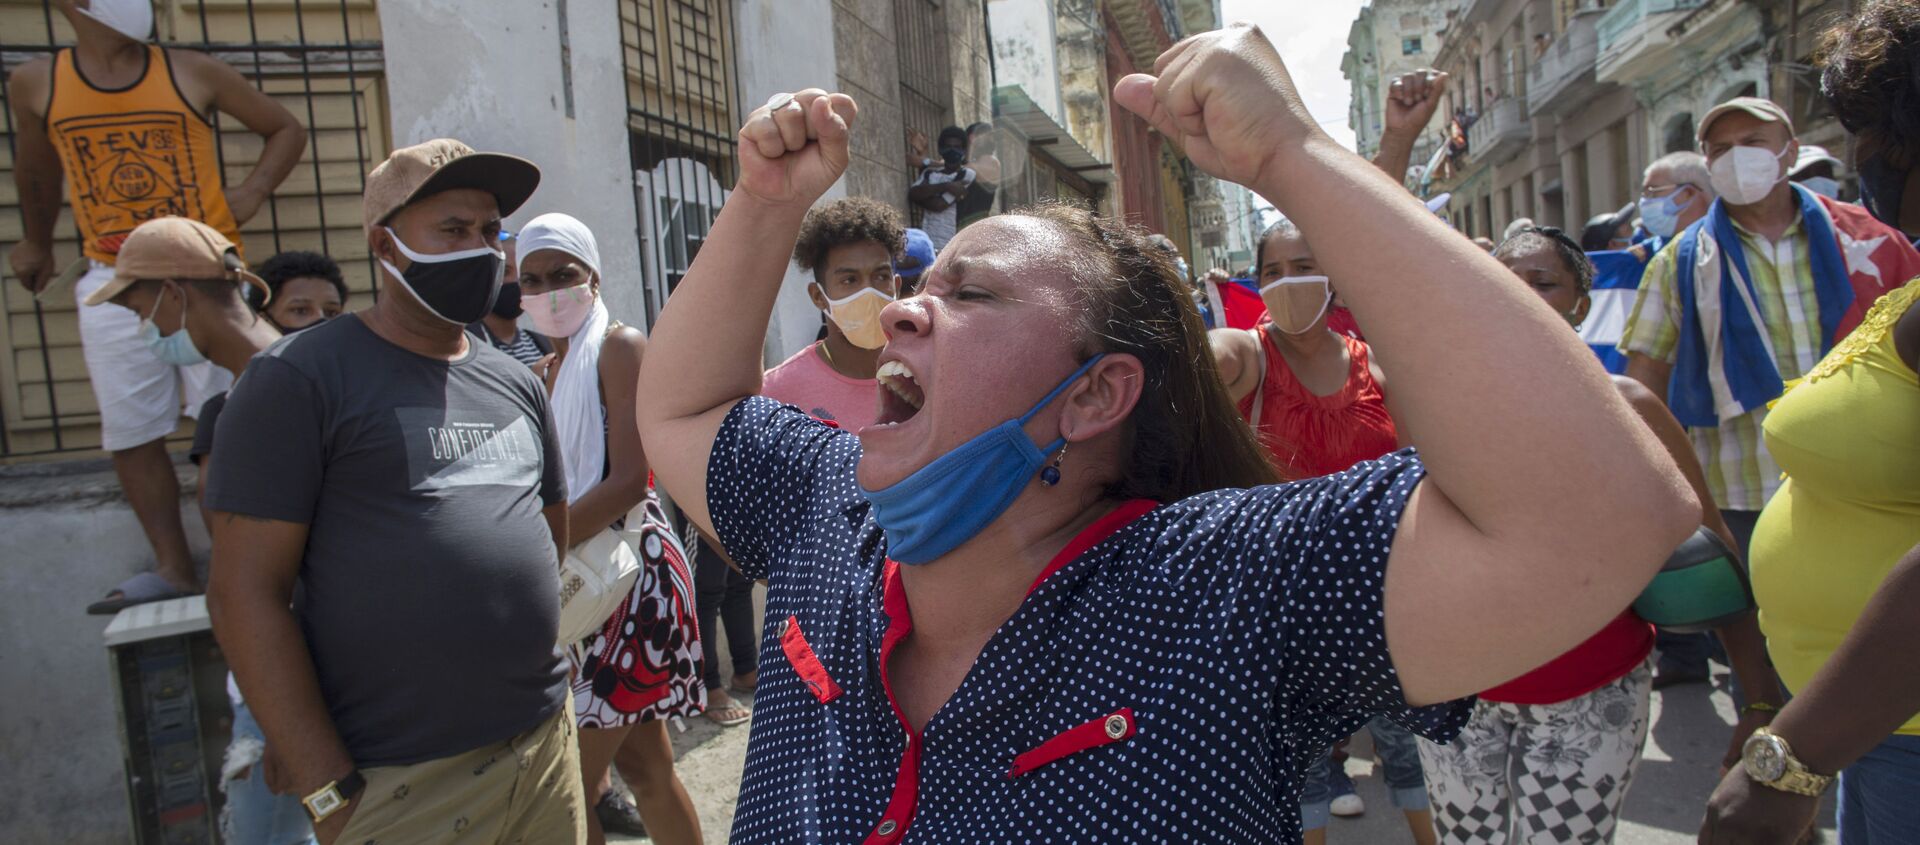 A woman shouts pro-government slogans as anti-government protesters march in Havana, Cuba, Sunday, July 11, 2021 - Sputnik International, 1920, 12.07.2021